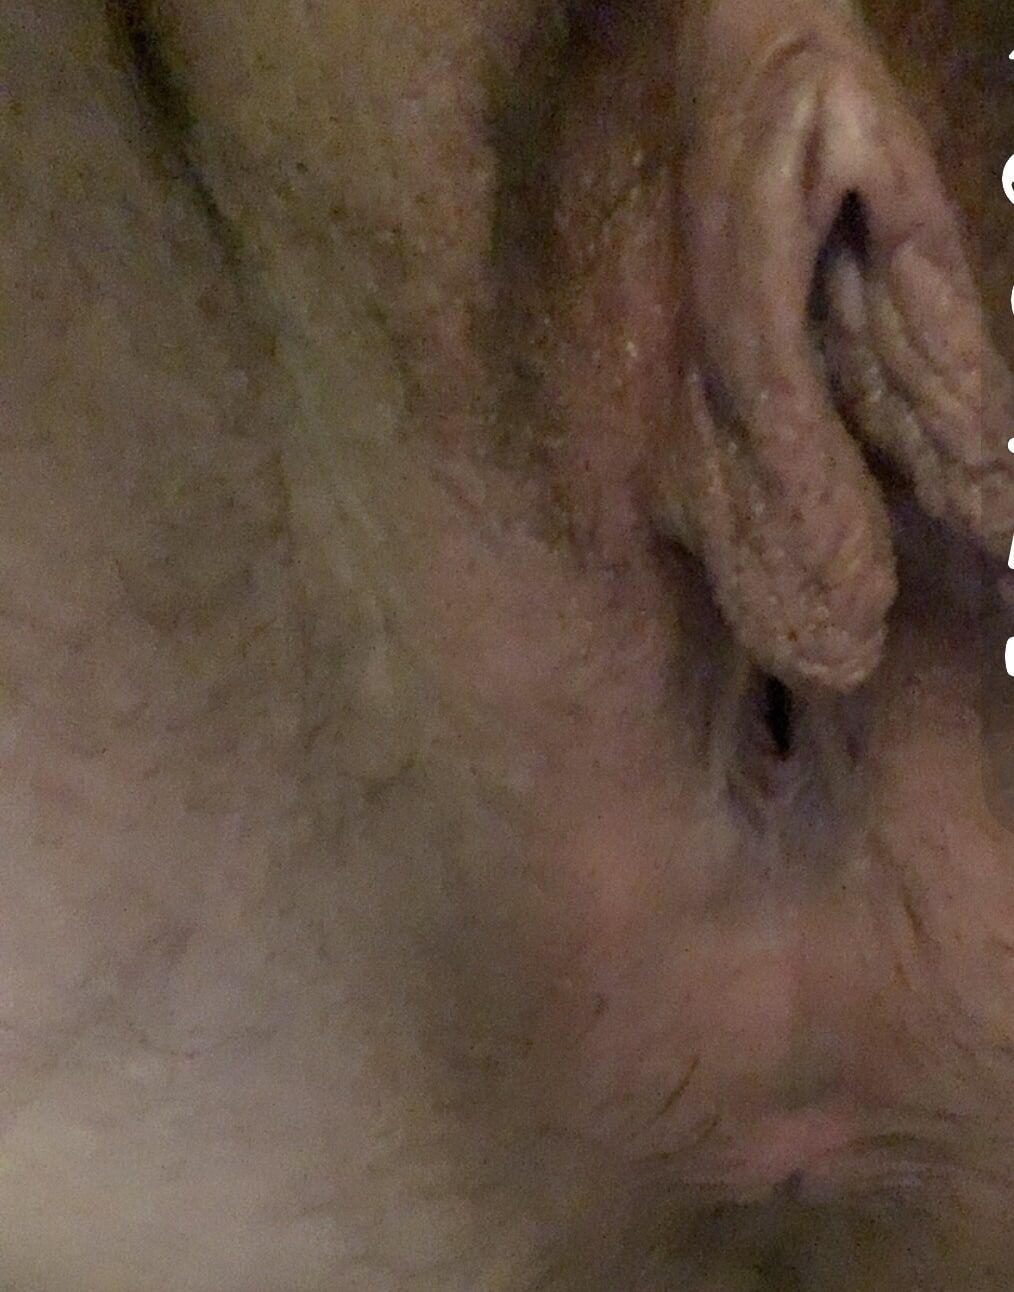 My pussy and ass #3